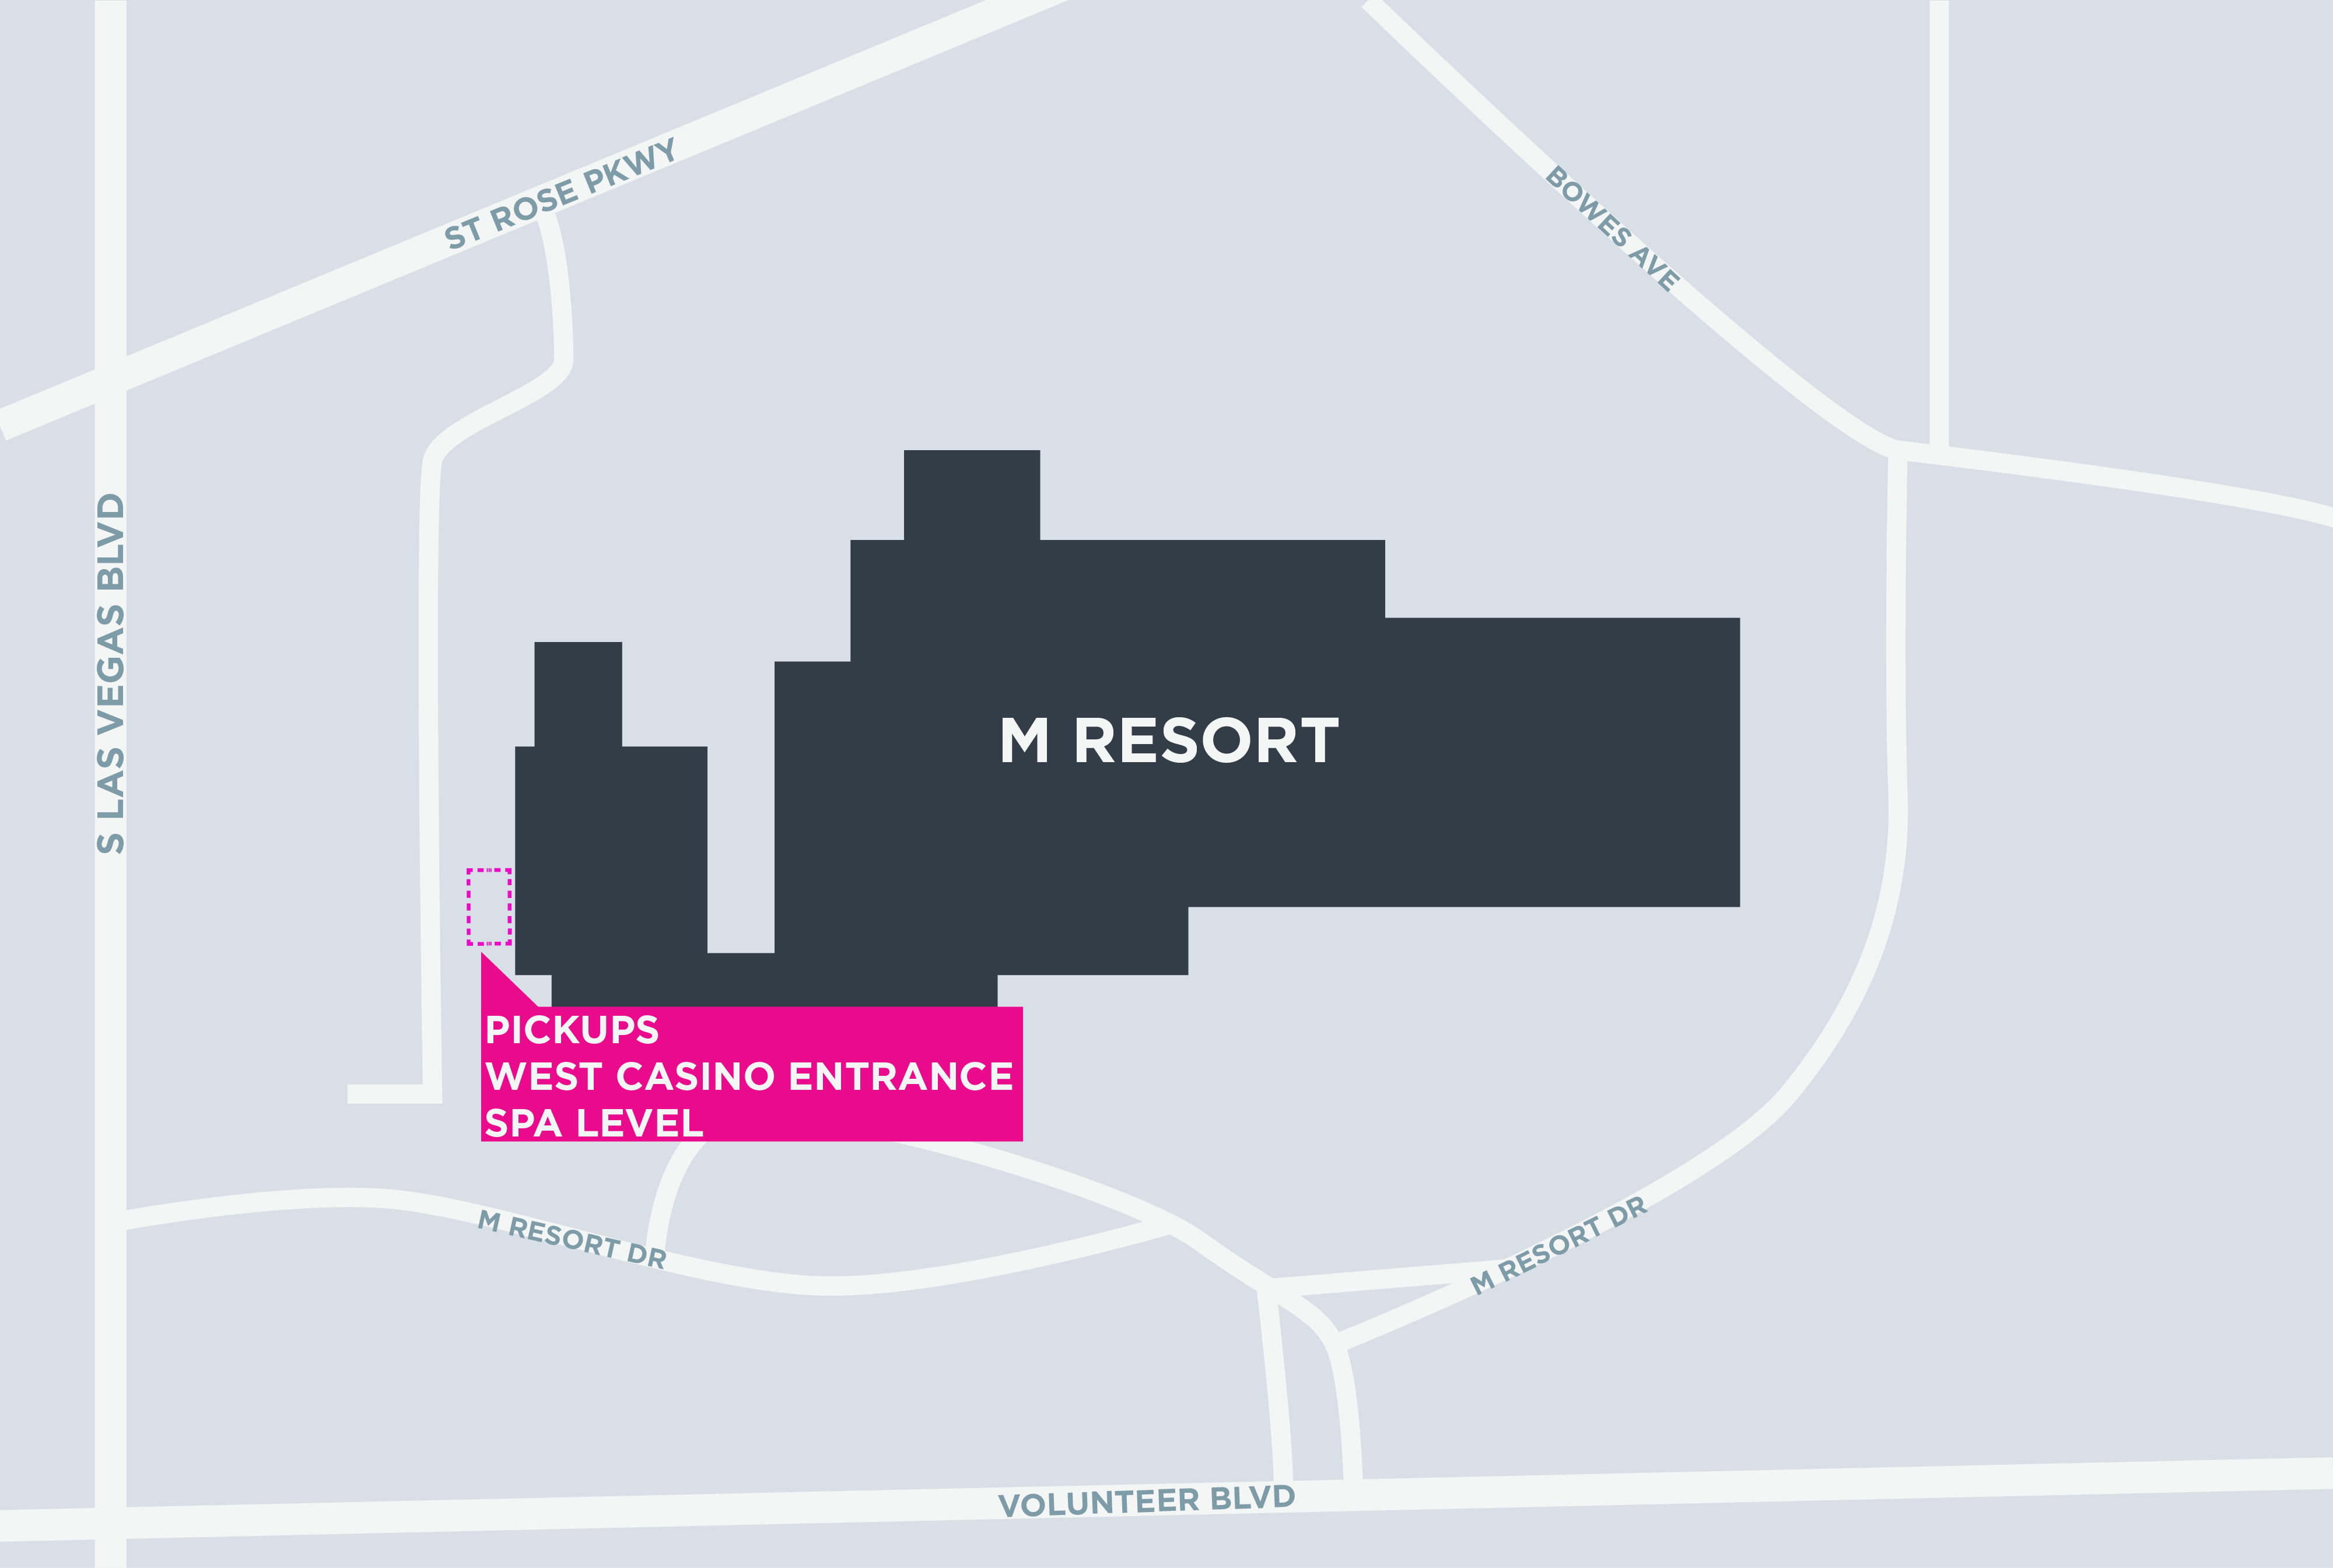 Map of the pickup and drop-off area at the M Resort in Las Vegas.